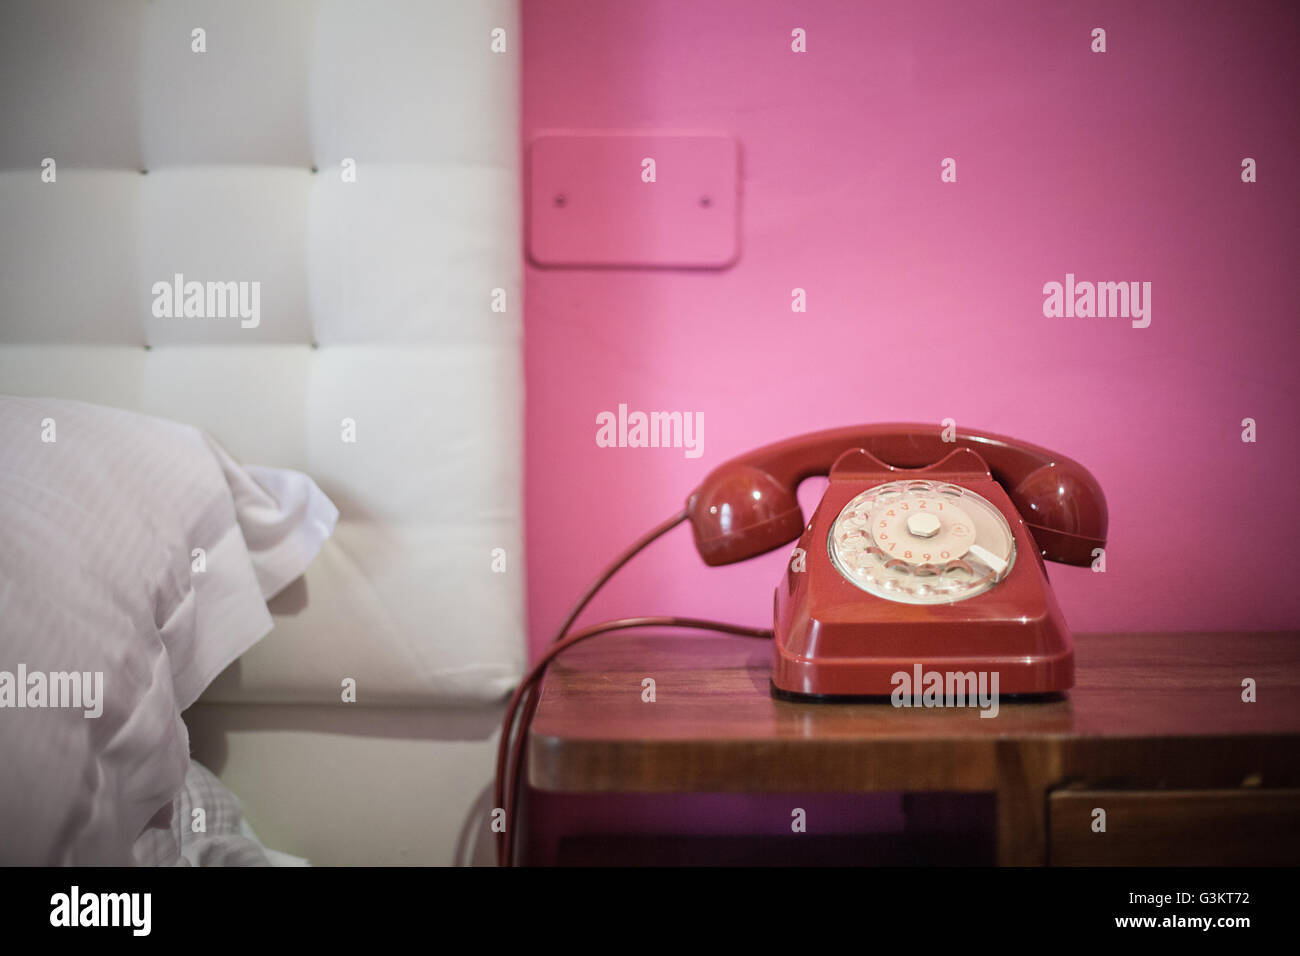 Red rotary telephone on bedside table Stock Photo